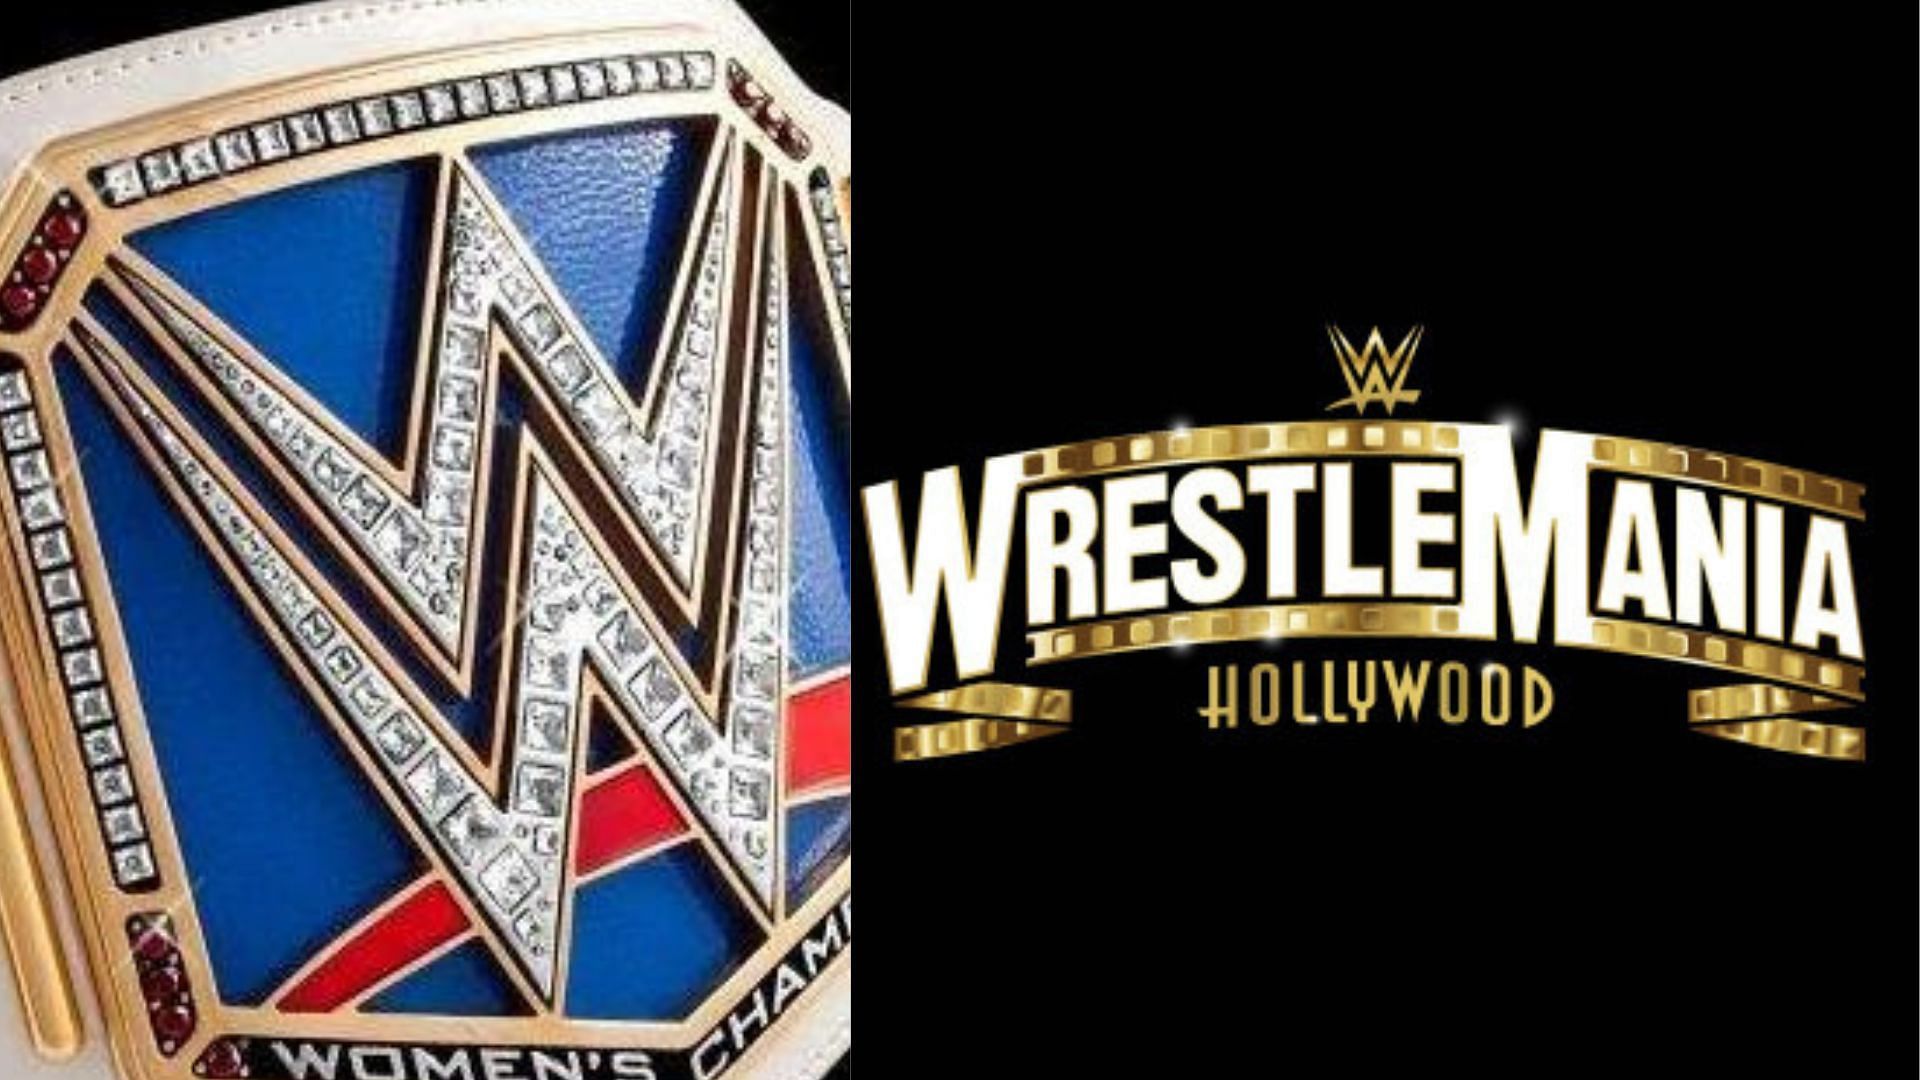 WWE WrestleMania 39 will air live this weekend in Los Angeles.